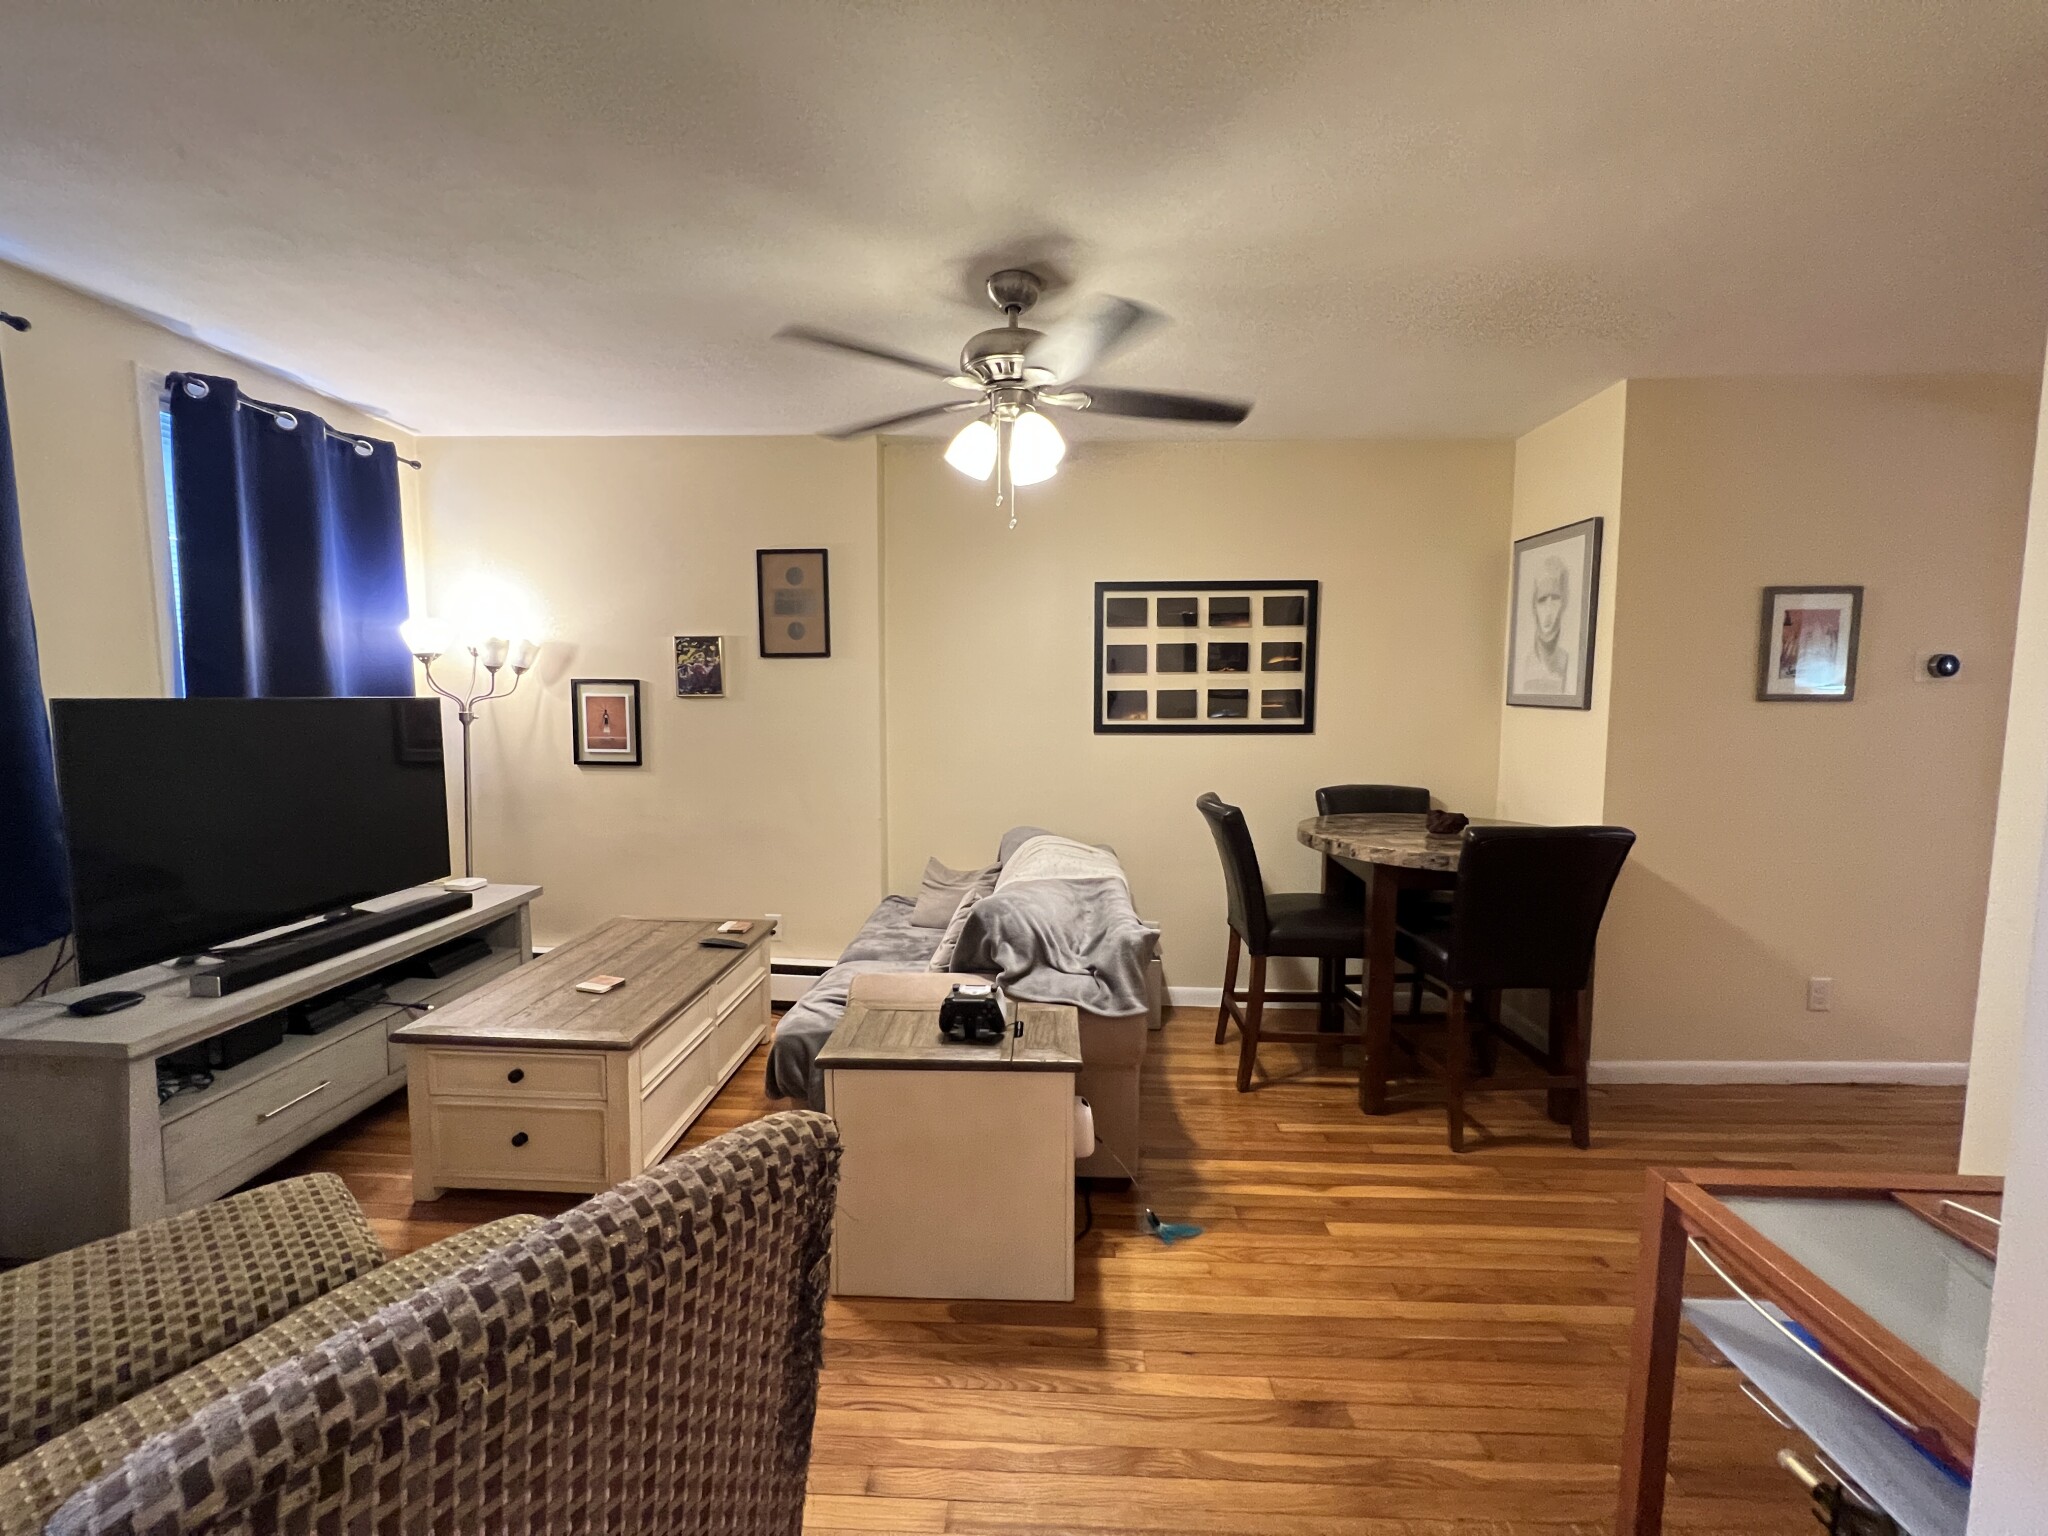 Photos of apartment on Broadway,Somerville MA 02145